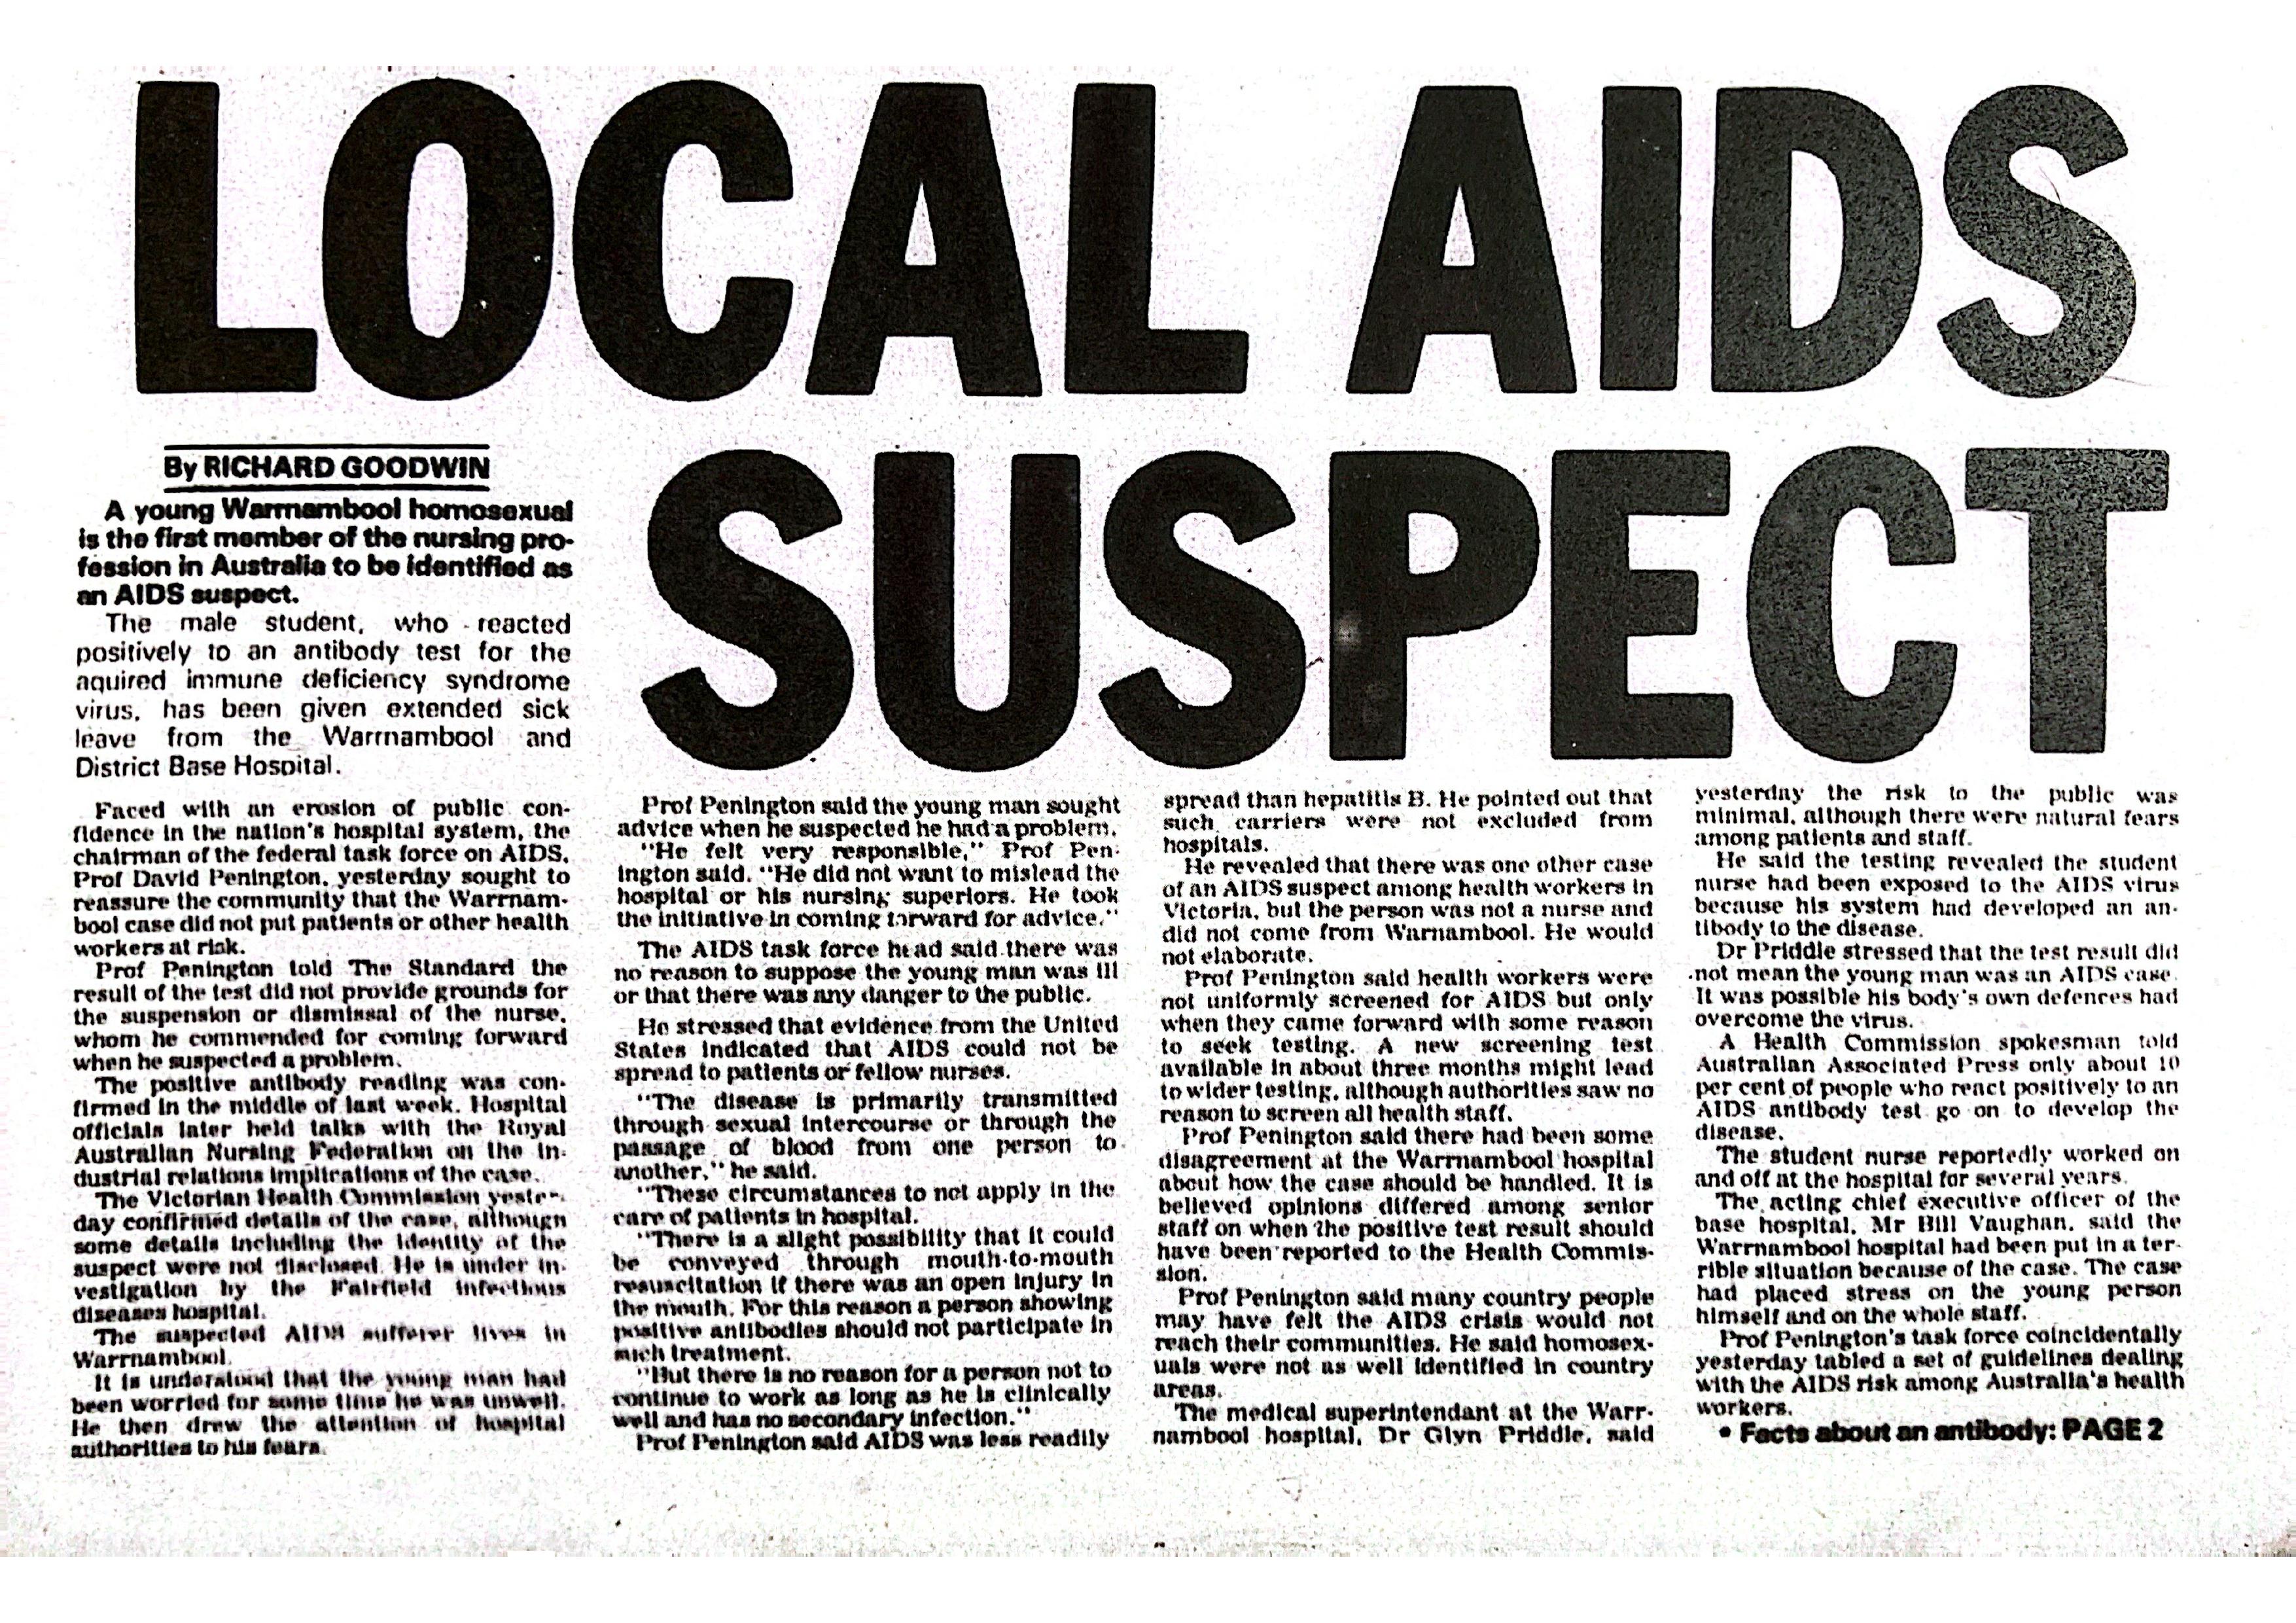 The front page of a newspaper with a headline reading 'LOCAL AIDS SUSPECT'.